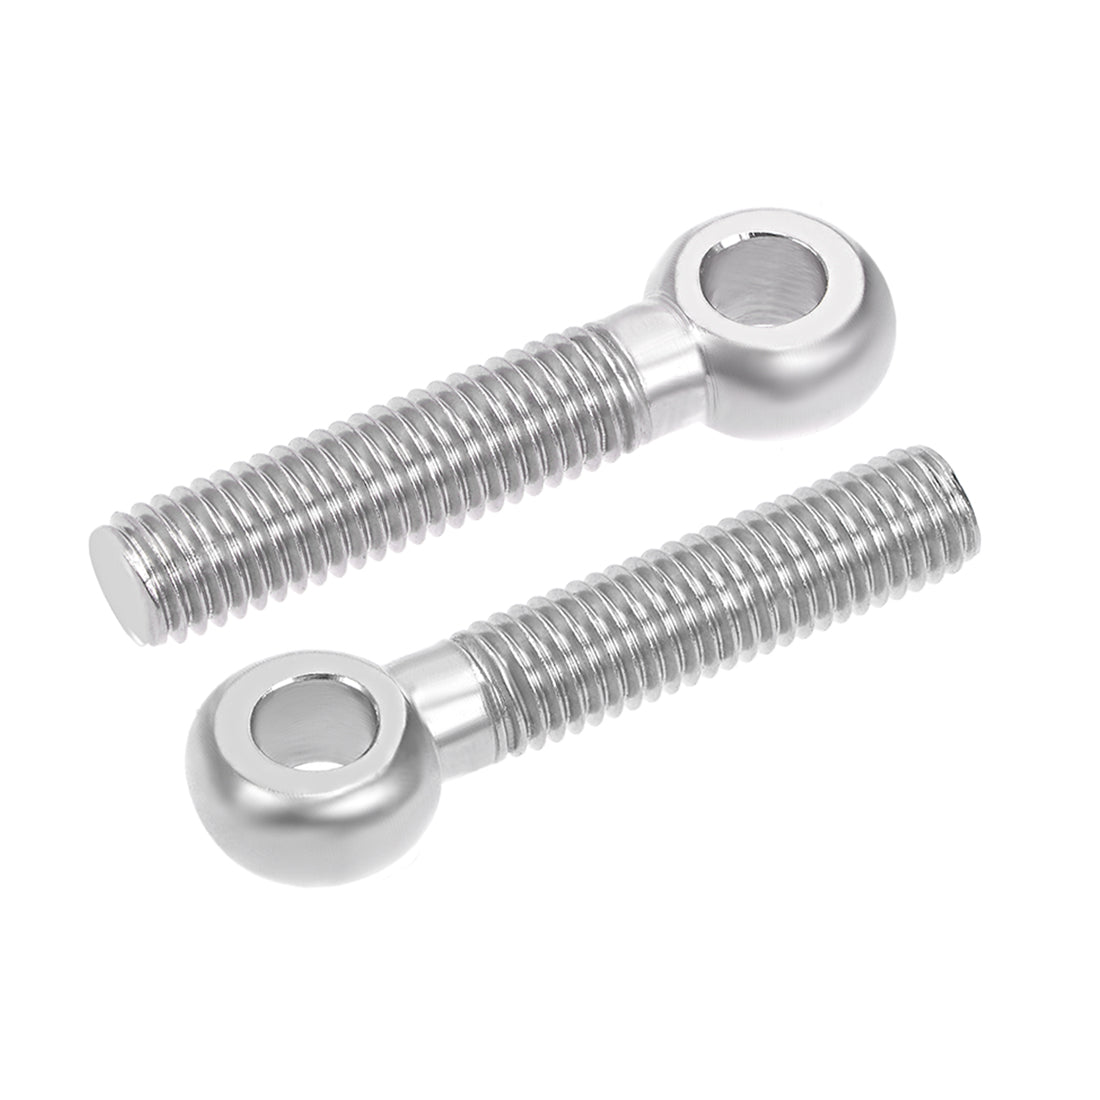 Uxcell Uxcell M5 x 40mm 304 Stainless Steel Machine Shoulder Lift Eye Bolt Rigging 20pcs